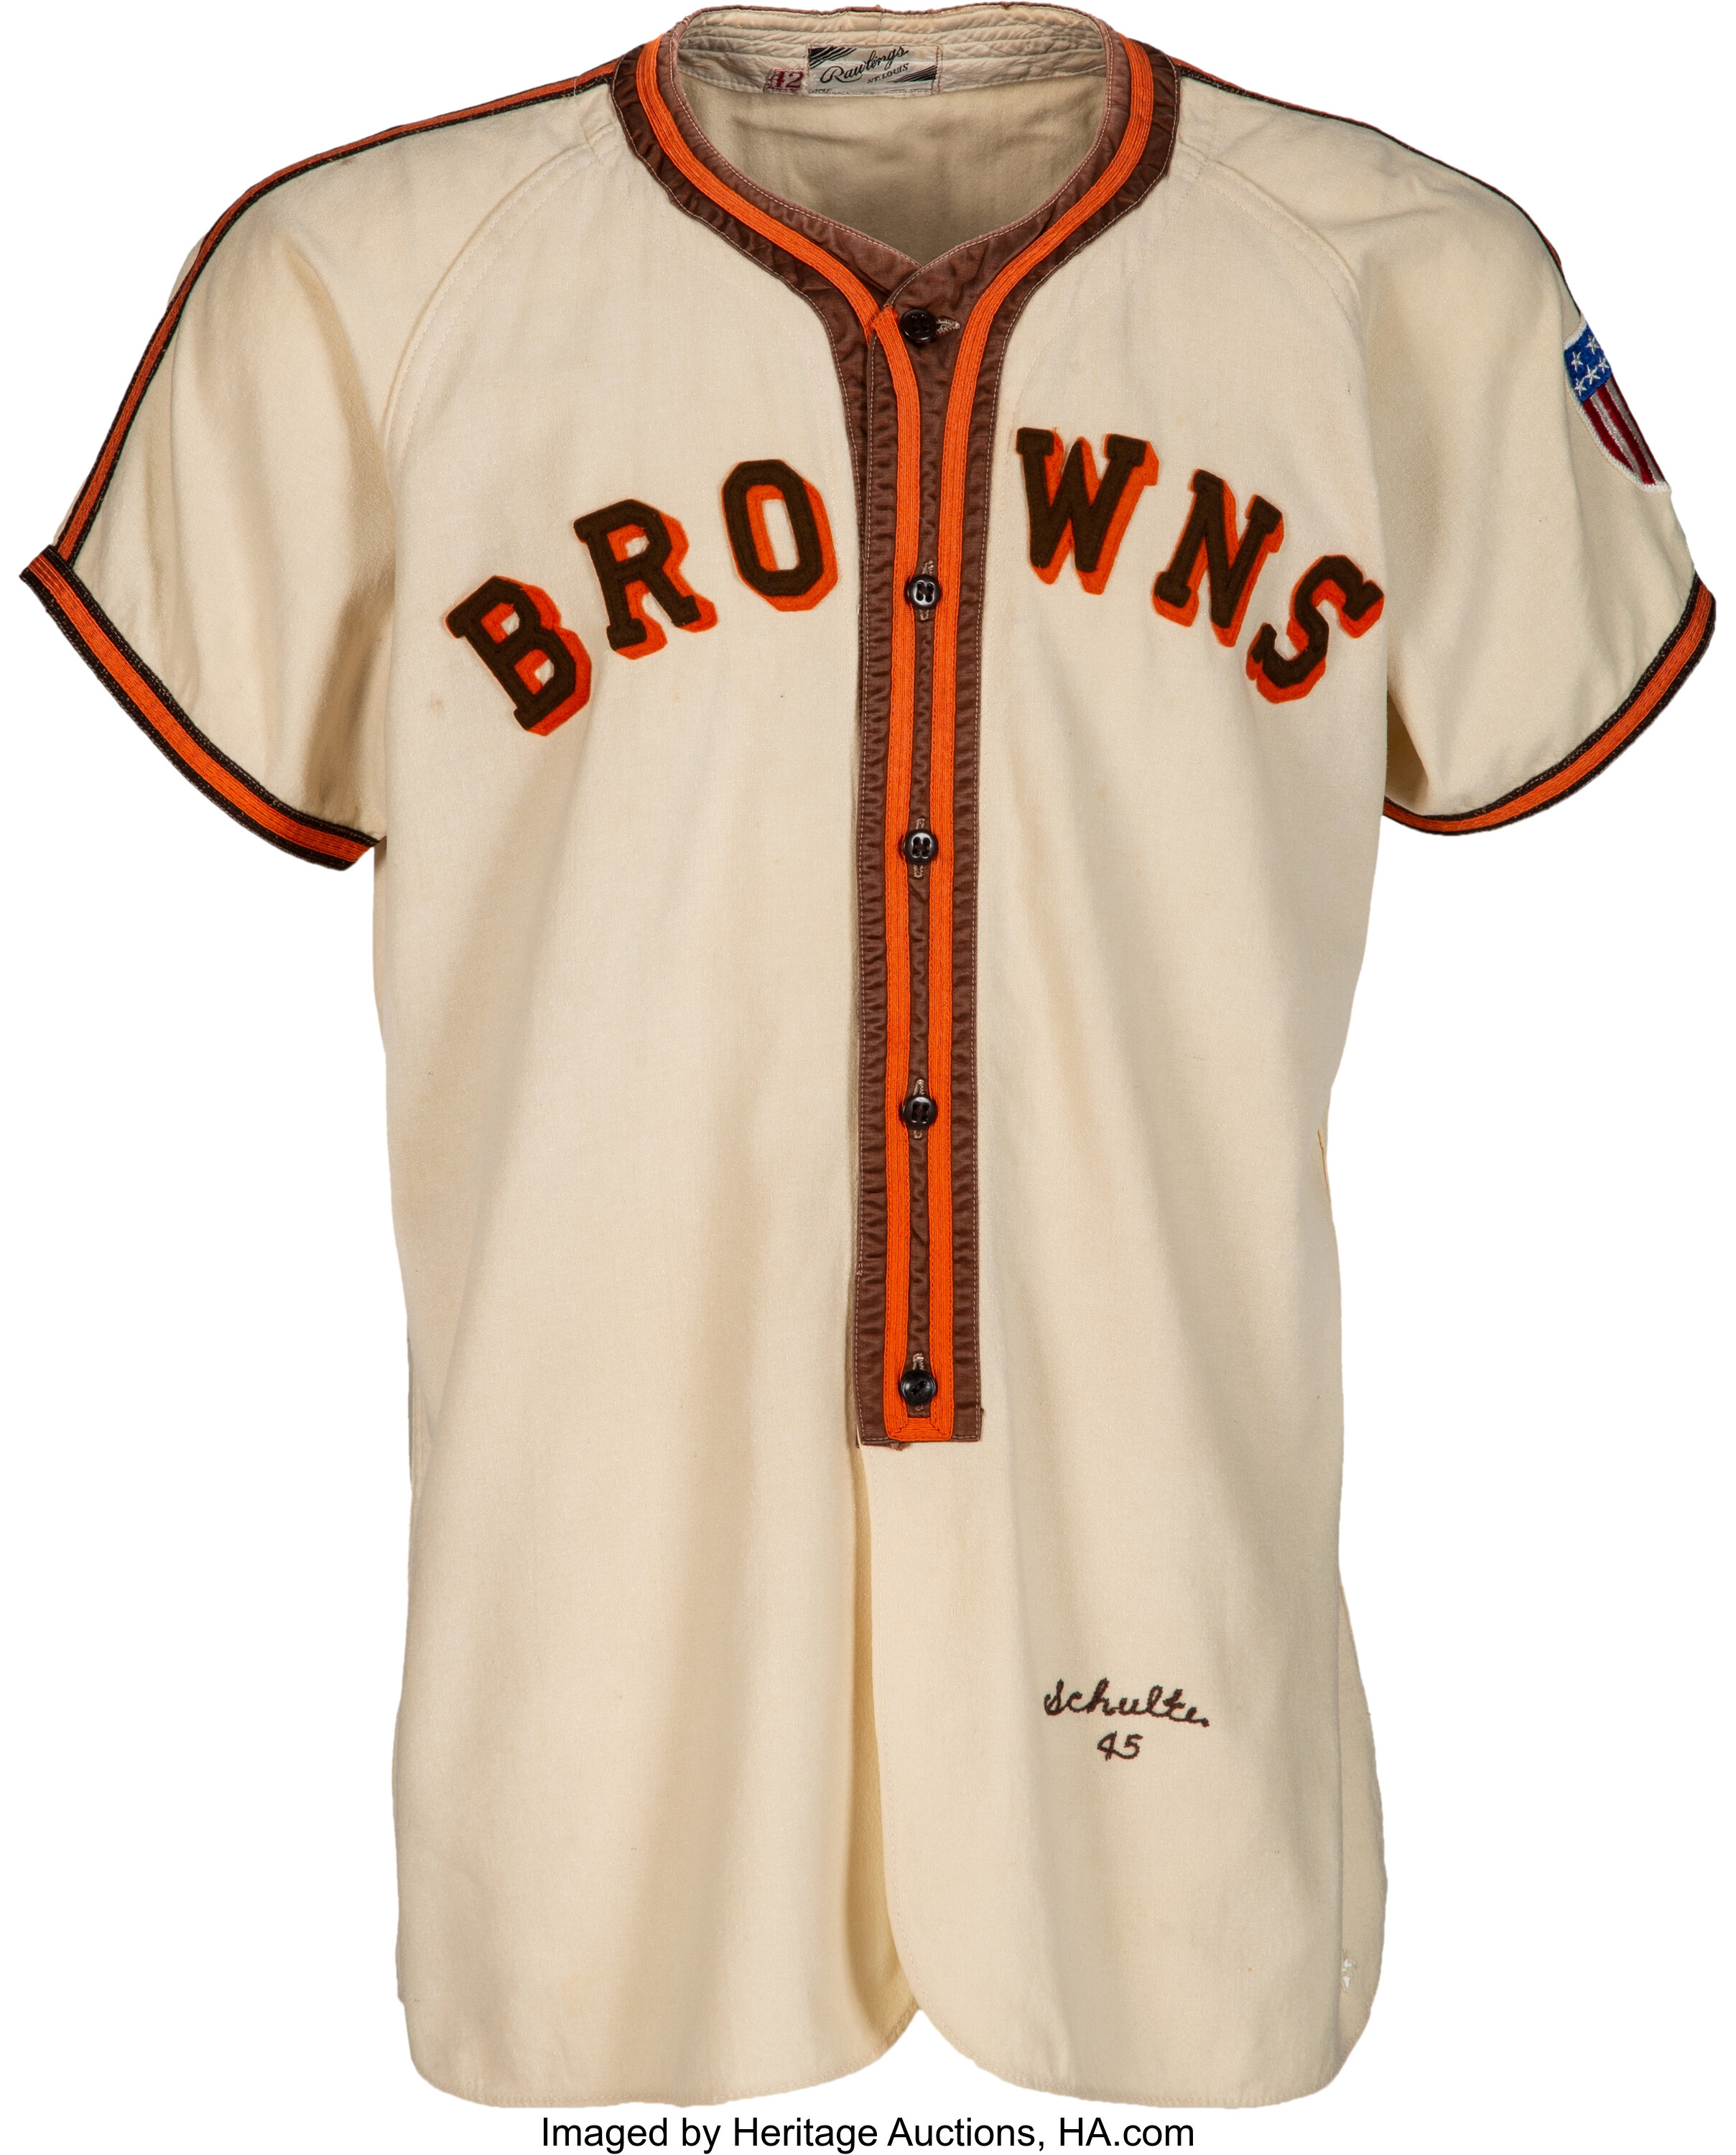 Image result for st louis browns images